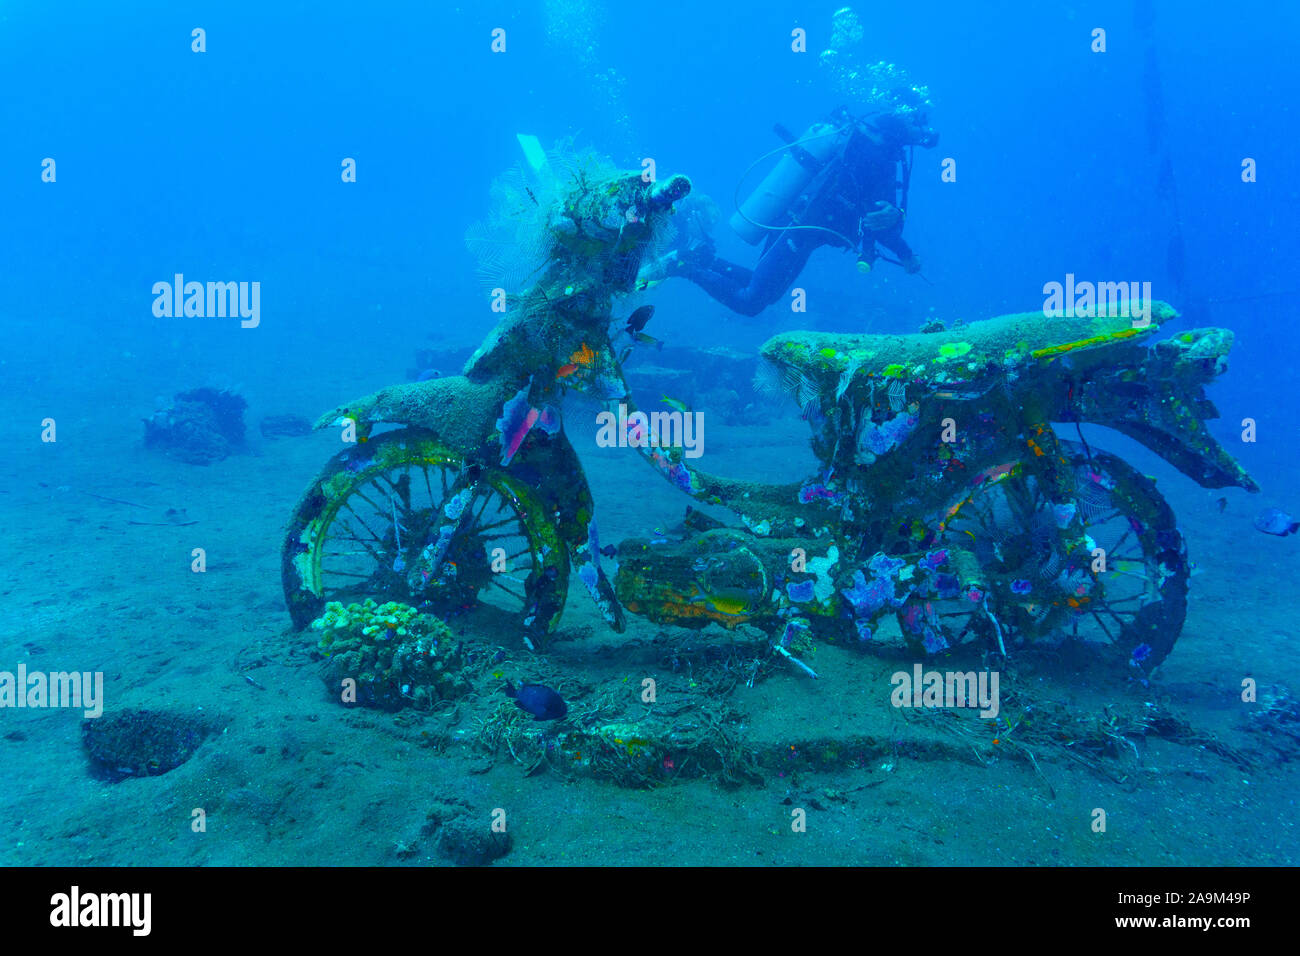 A scooter placed in an artificial coral reef in Bali (Indonesia) Stock Photo